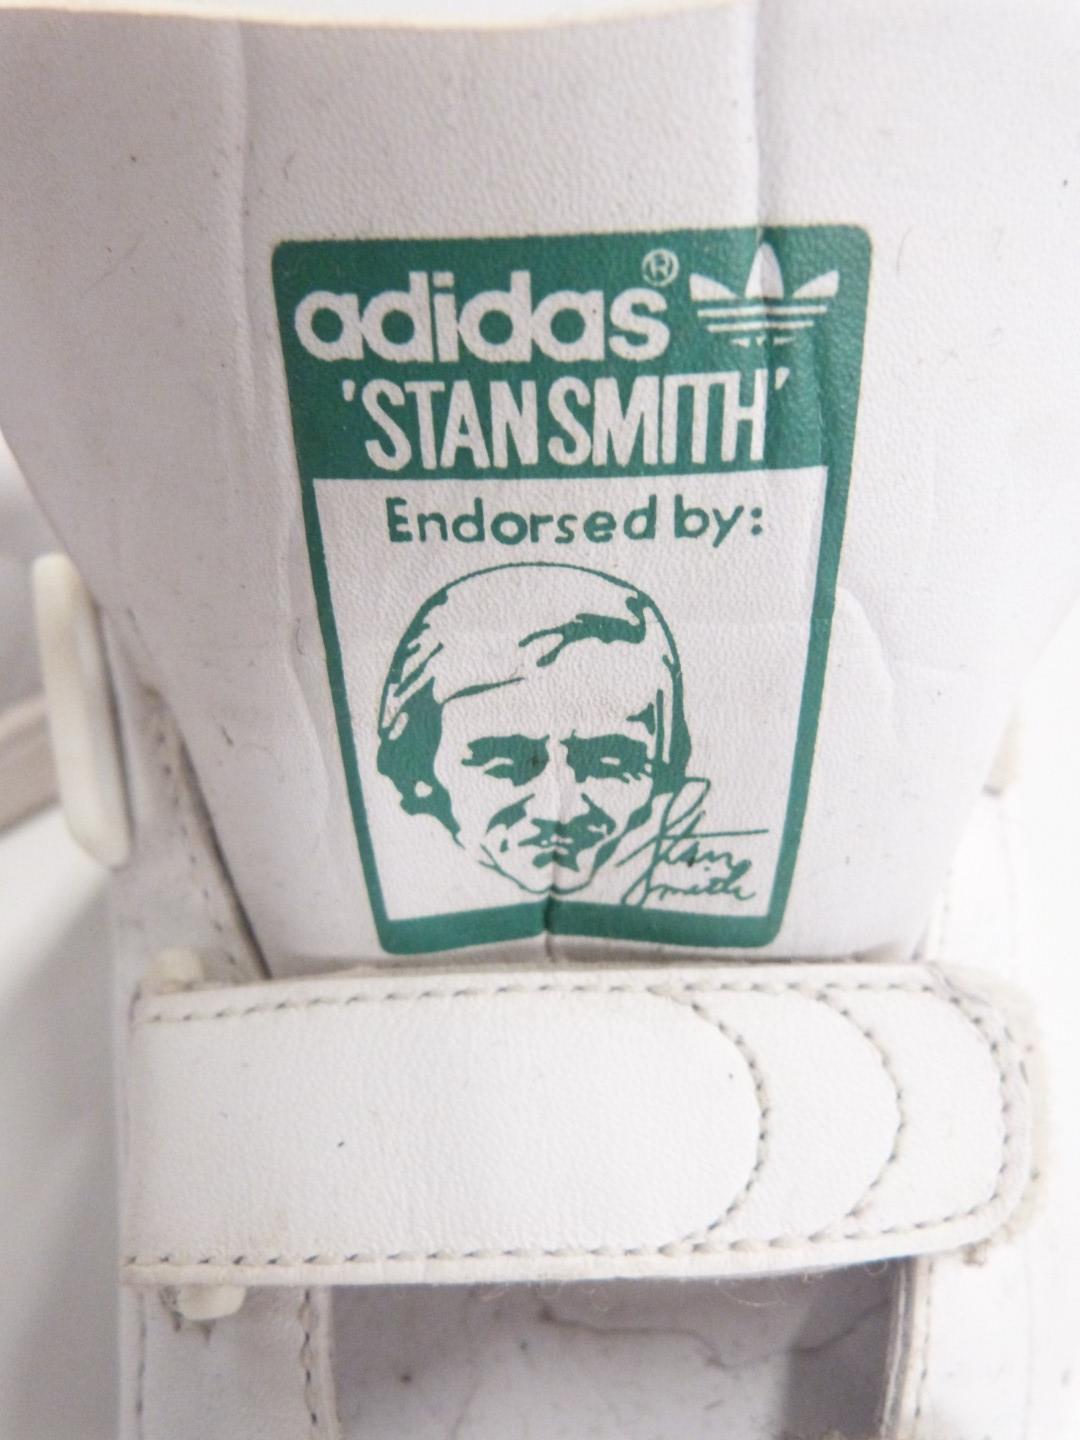 Five pairs of Addias trainers including Superstar (UK 5), white and green Stan Smith (UK 9.5), - Image 3 of 6